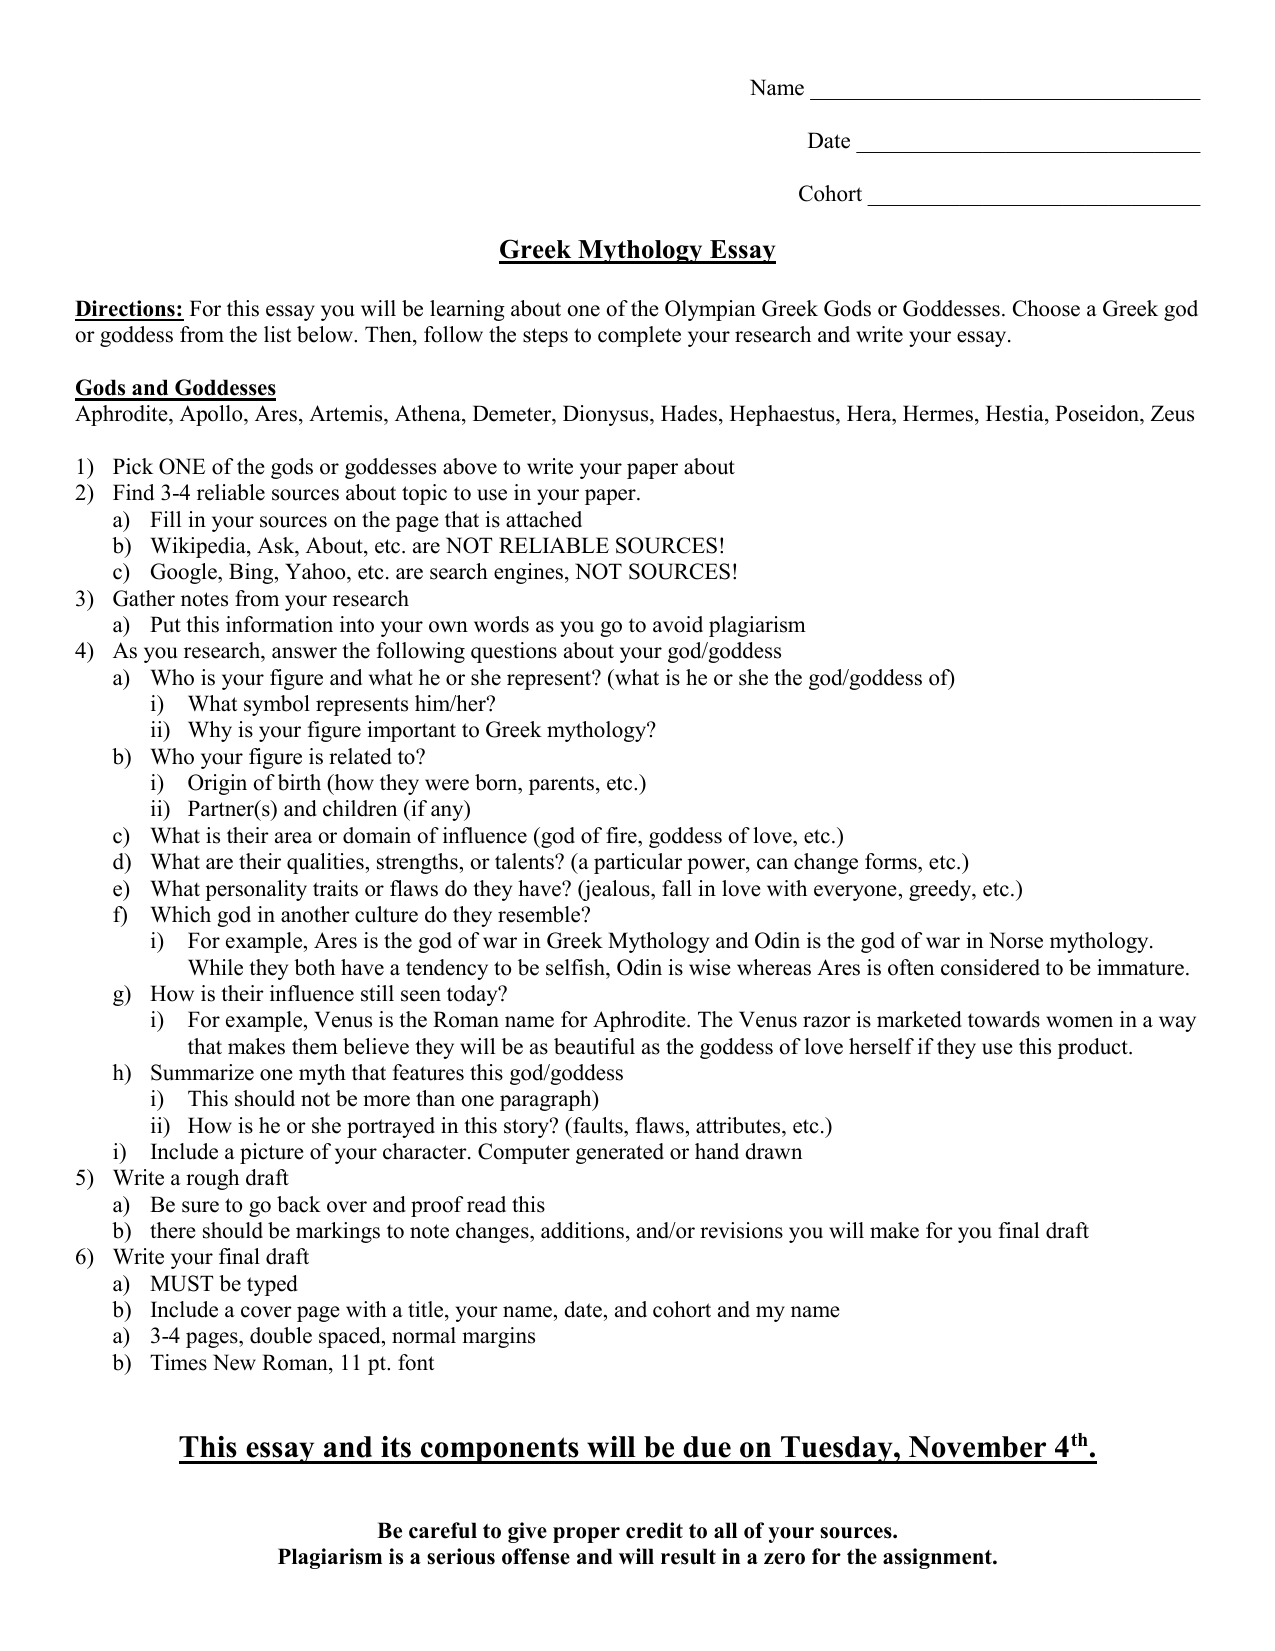 Sample of interest and activities for resume